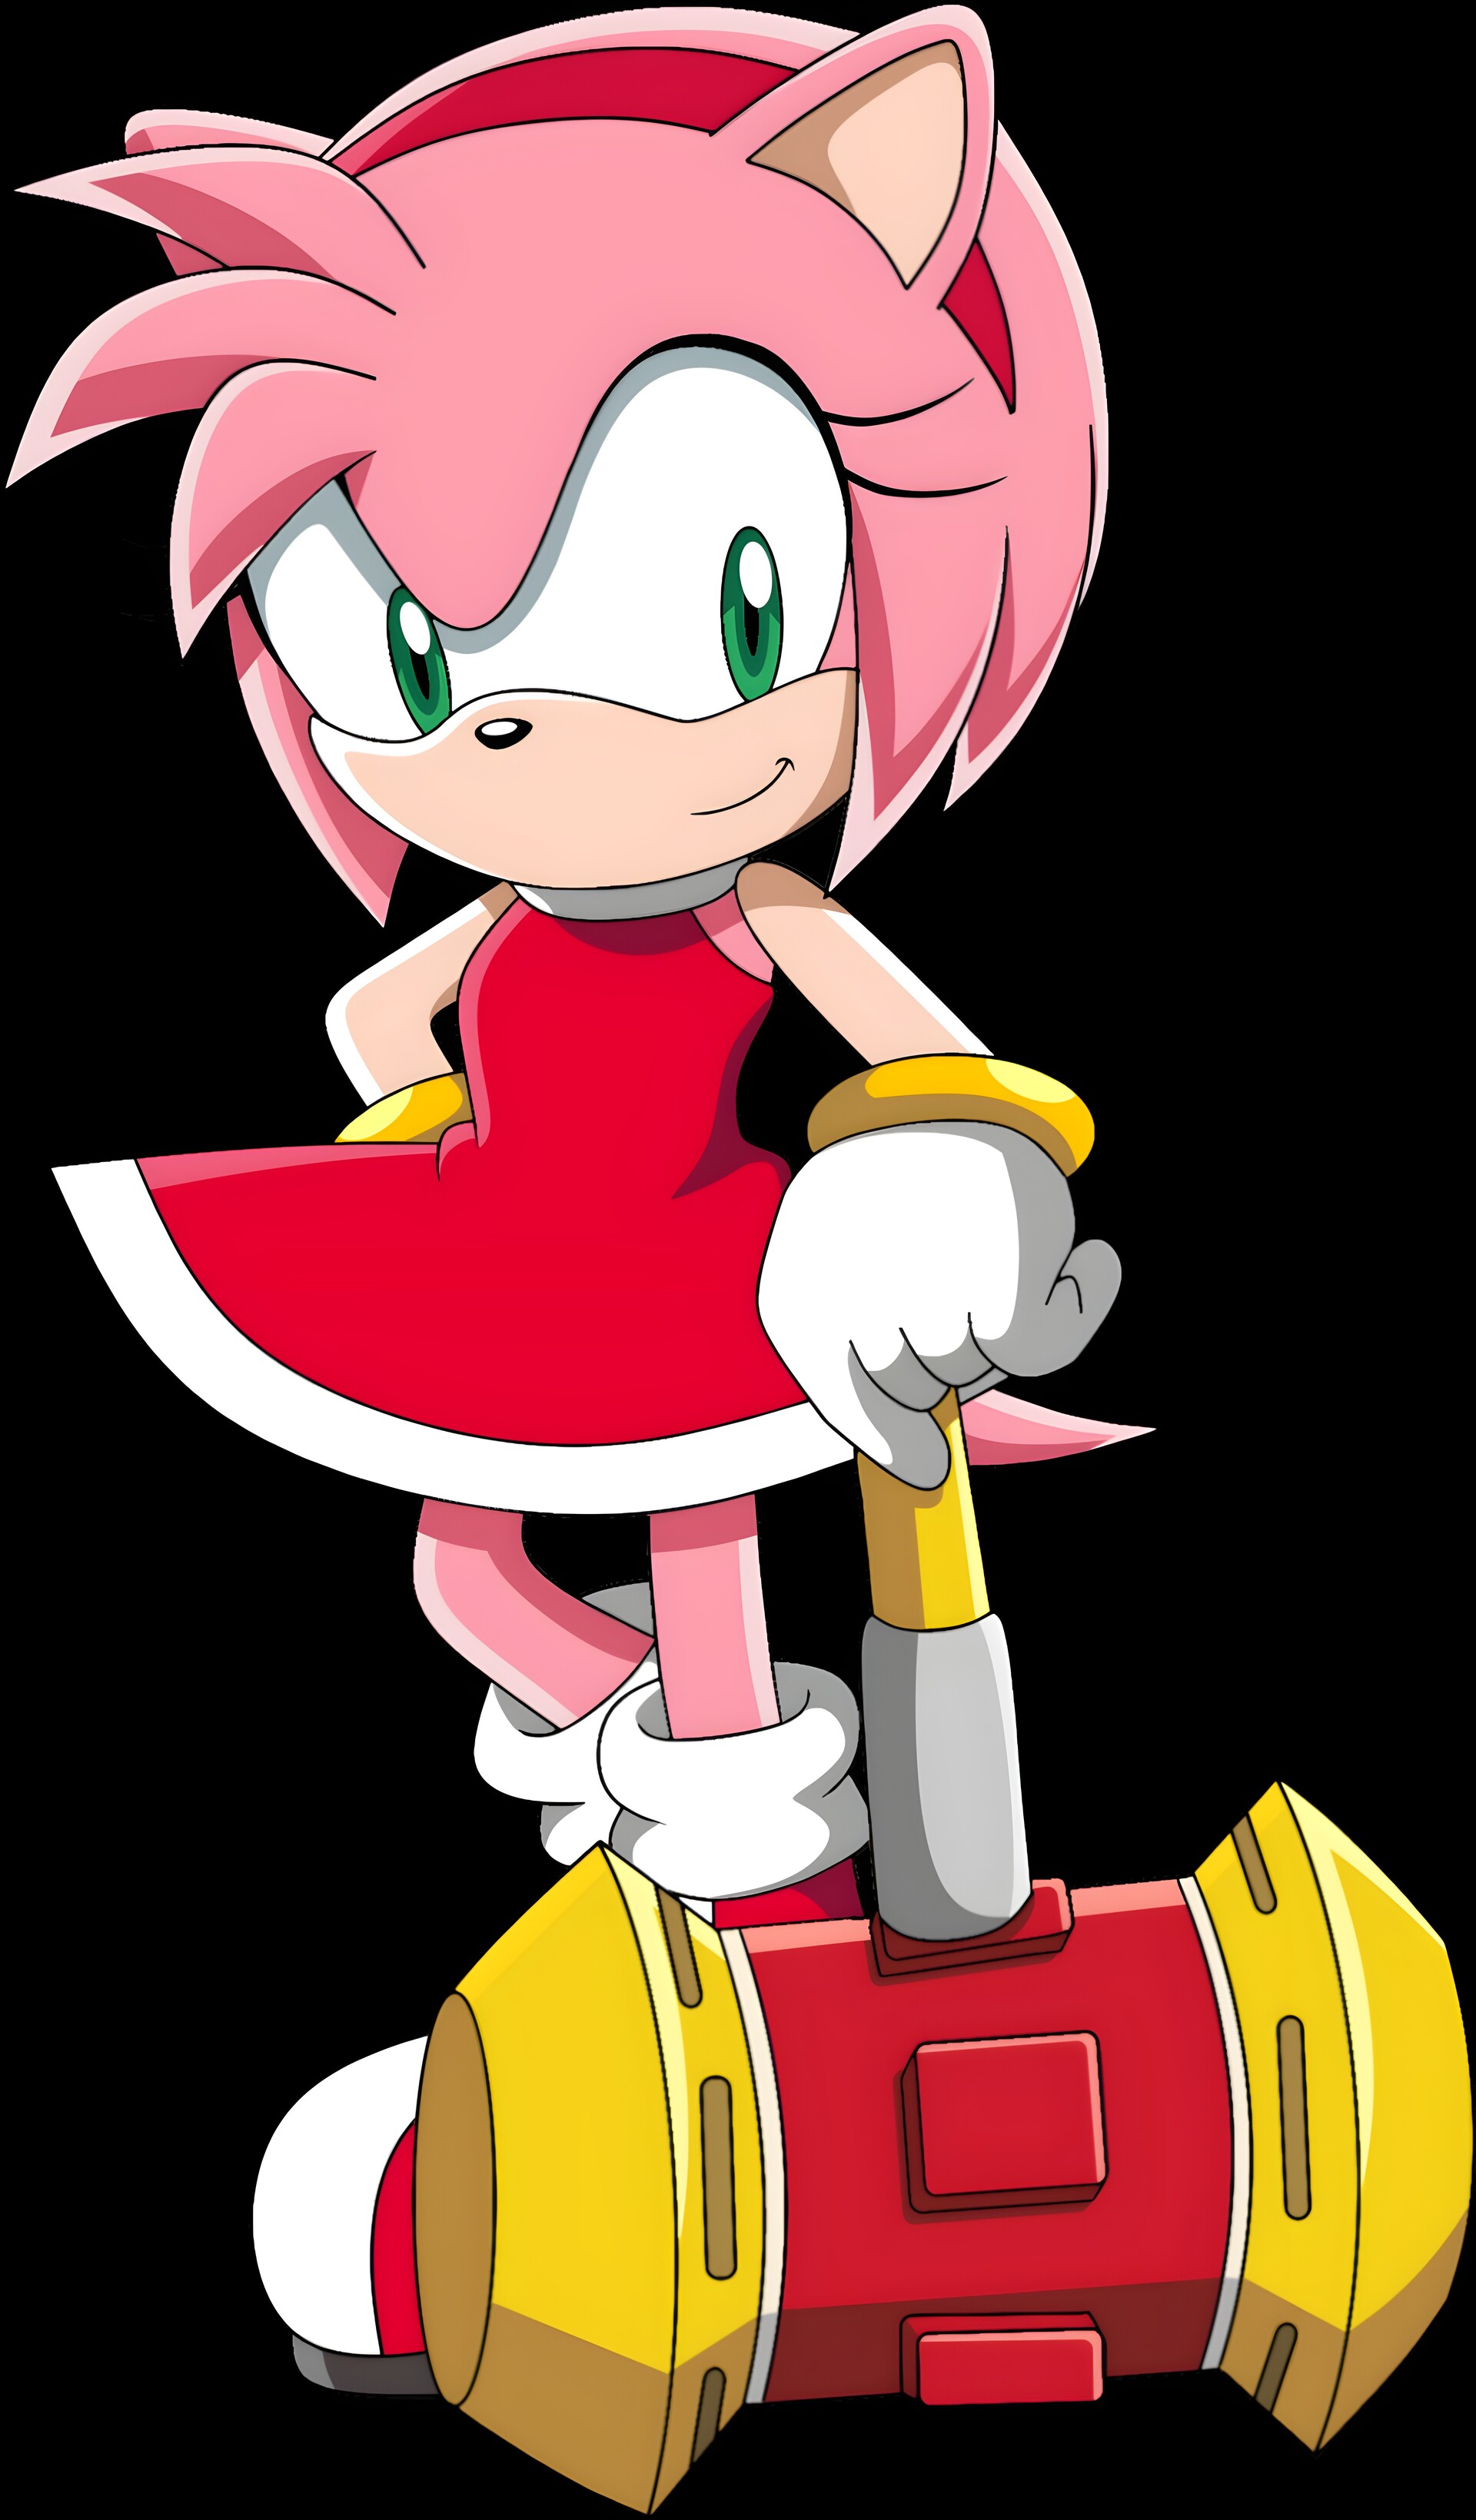 ArtStation - Sonic X Amy Rose (PNG) Sonic Boom Knuckles (PNG) Tokio (PNG)  Calen (PNG) Nico Vega (PNG) My 2020 St. Patrick's Day Gacha Look in PNG  Yi's St Patrick's Day Look (